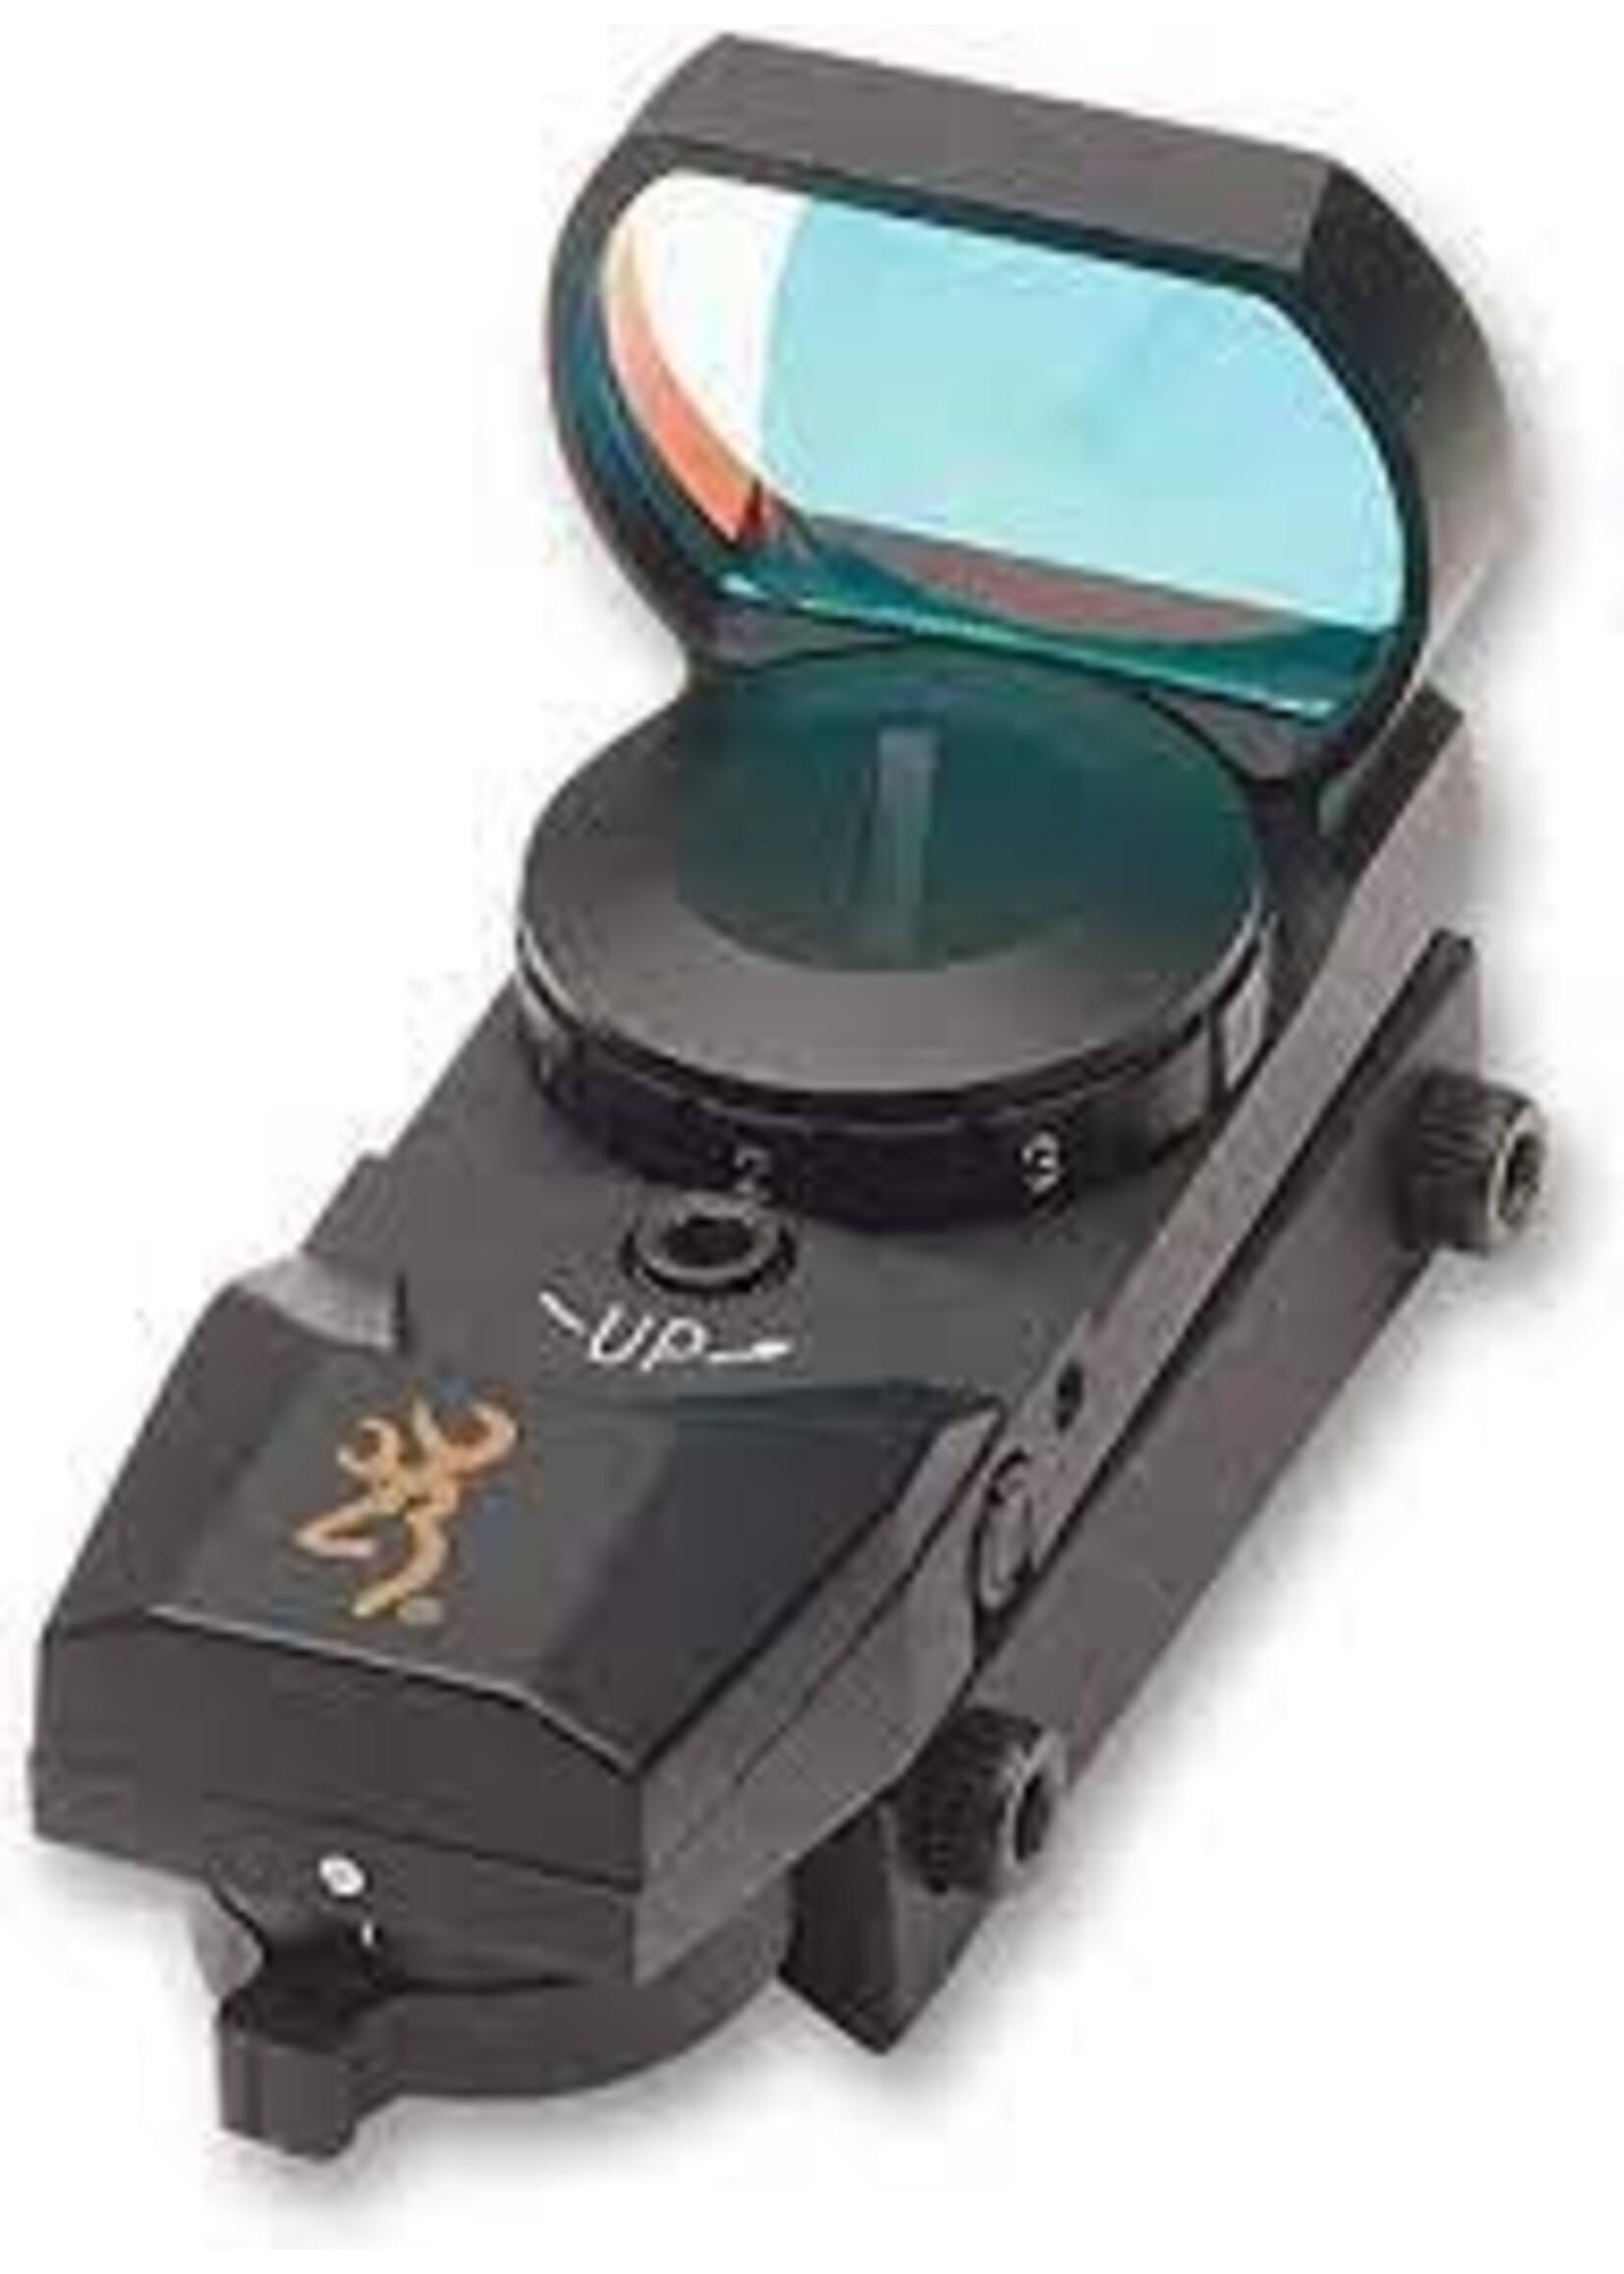 Browning Holographic Sight - Browning